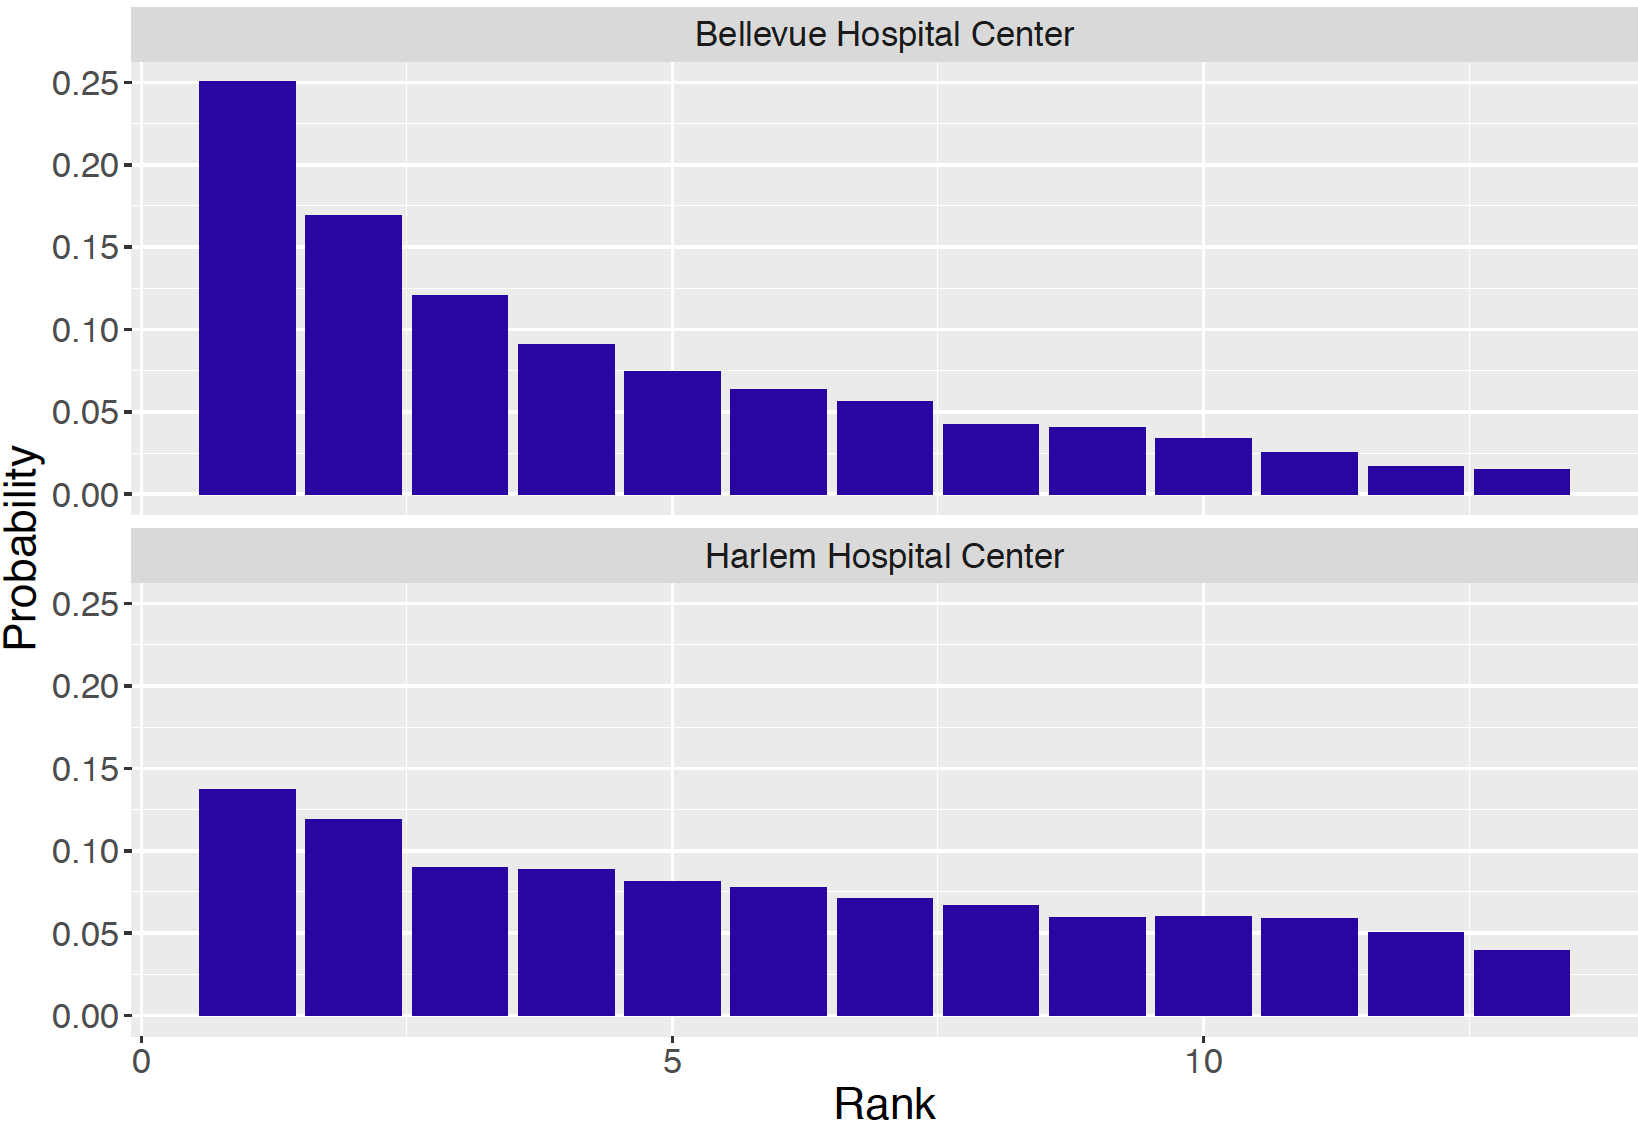 Posterior probabilities of rank for two hospitals.